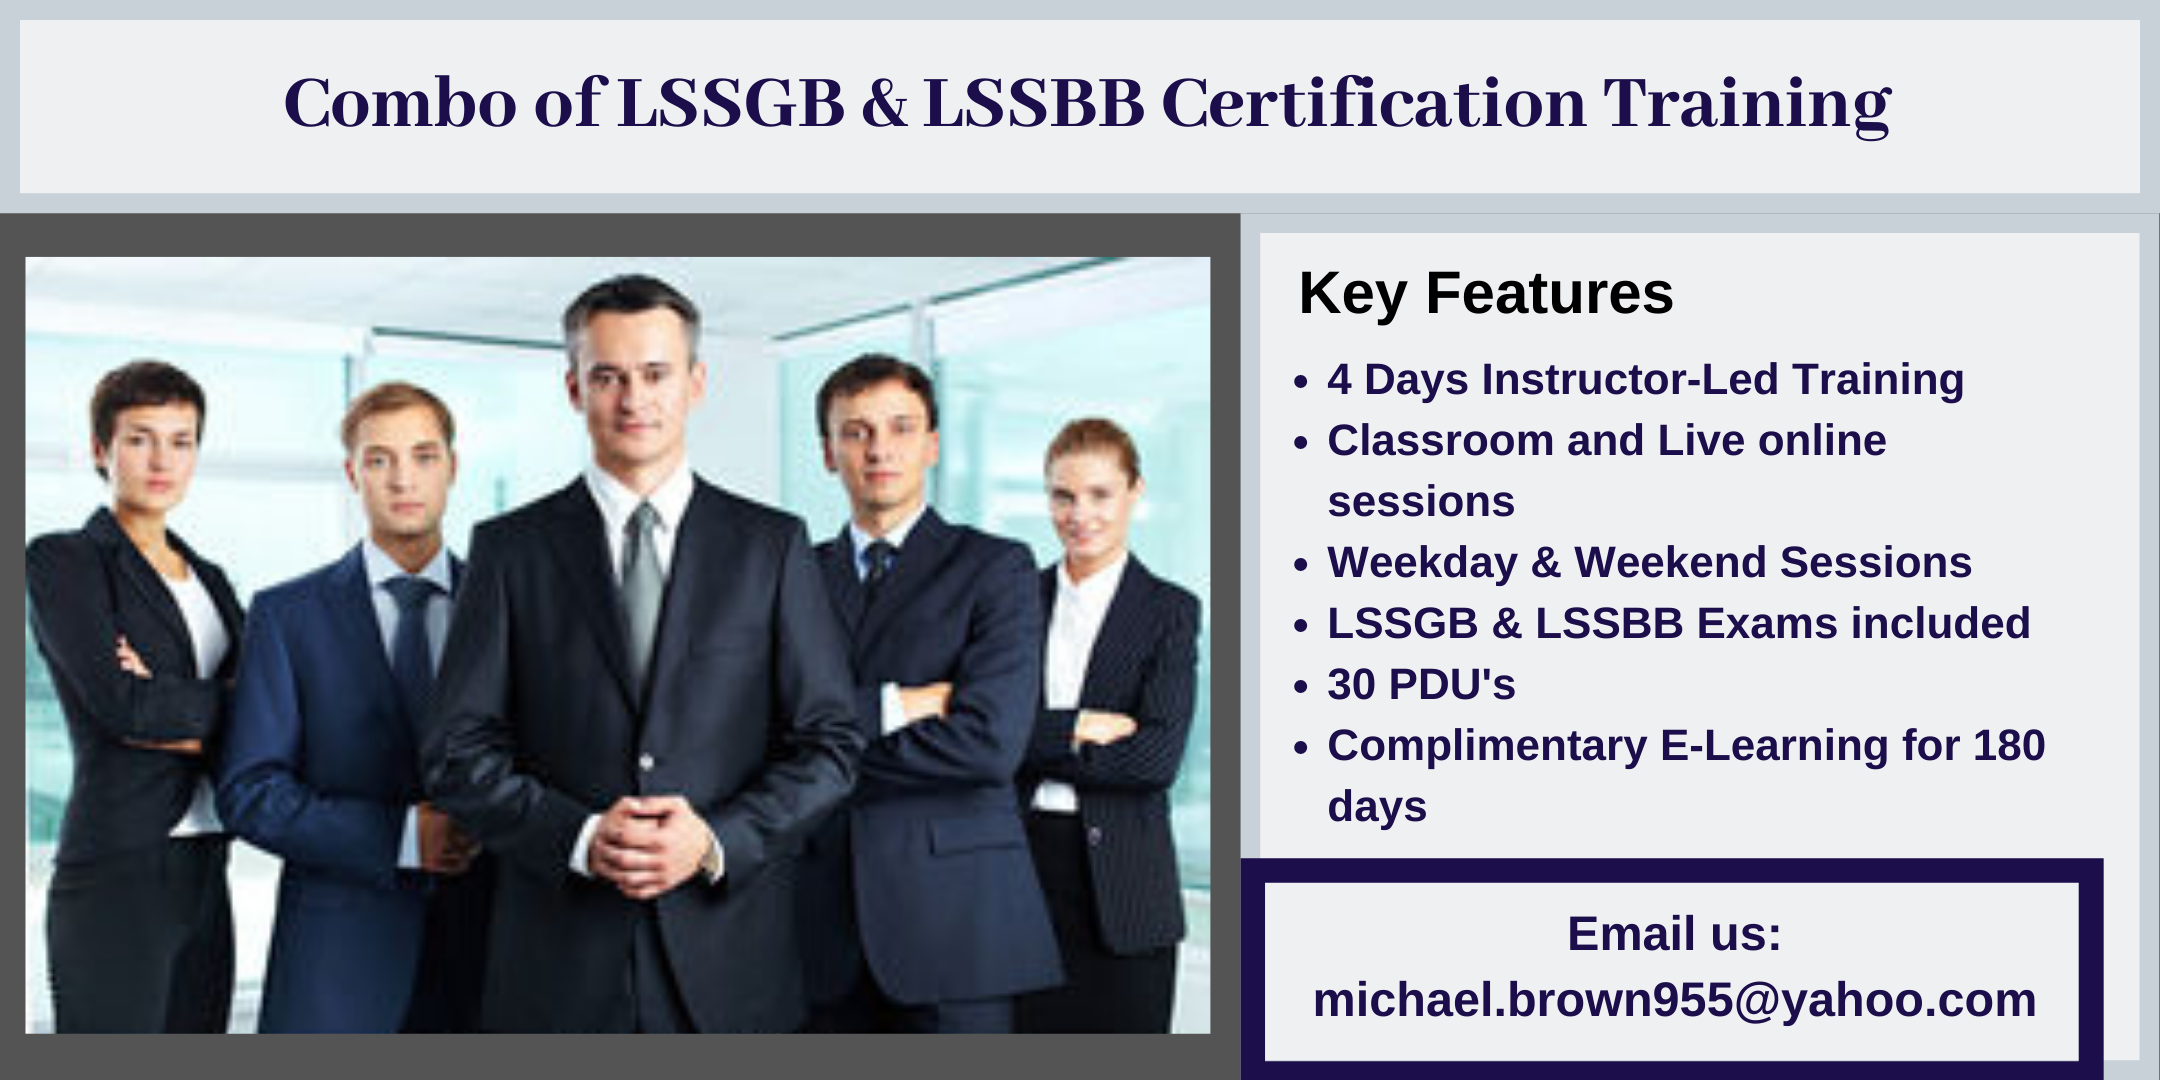 Combo of LSSGB & LSSBB 4 days Certification Training in El Paso, TX